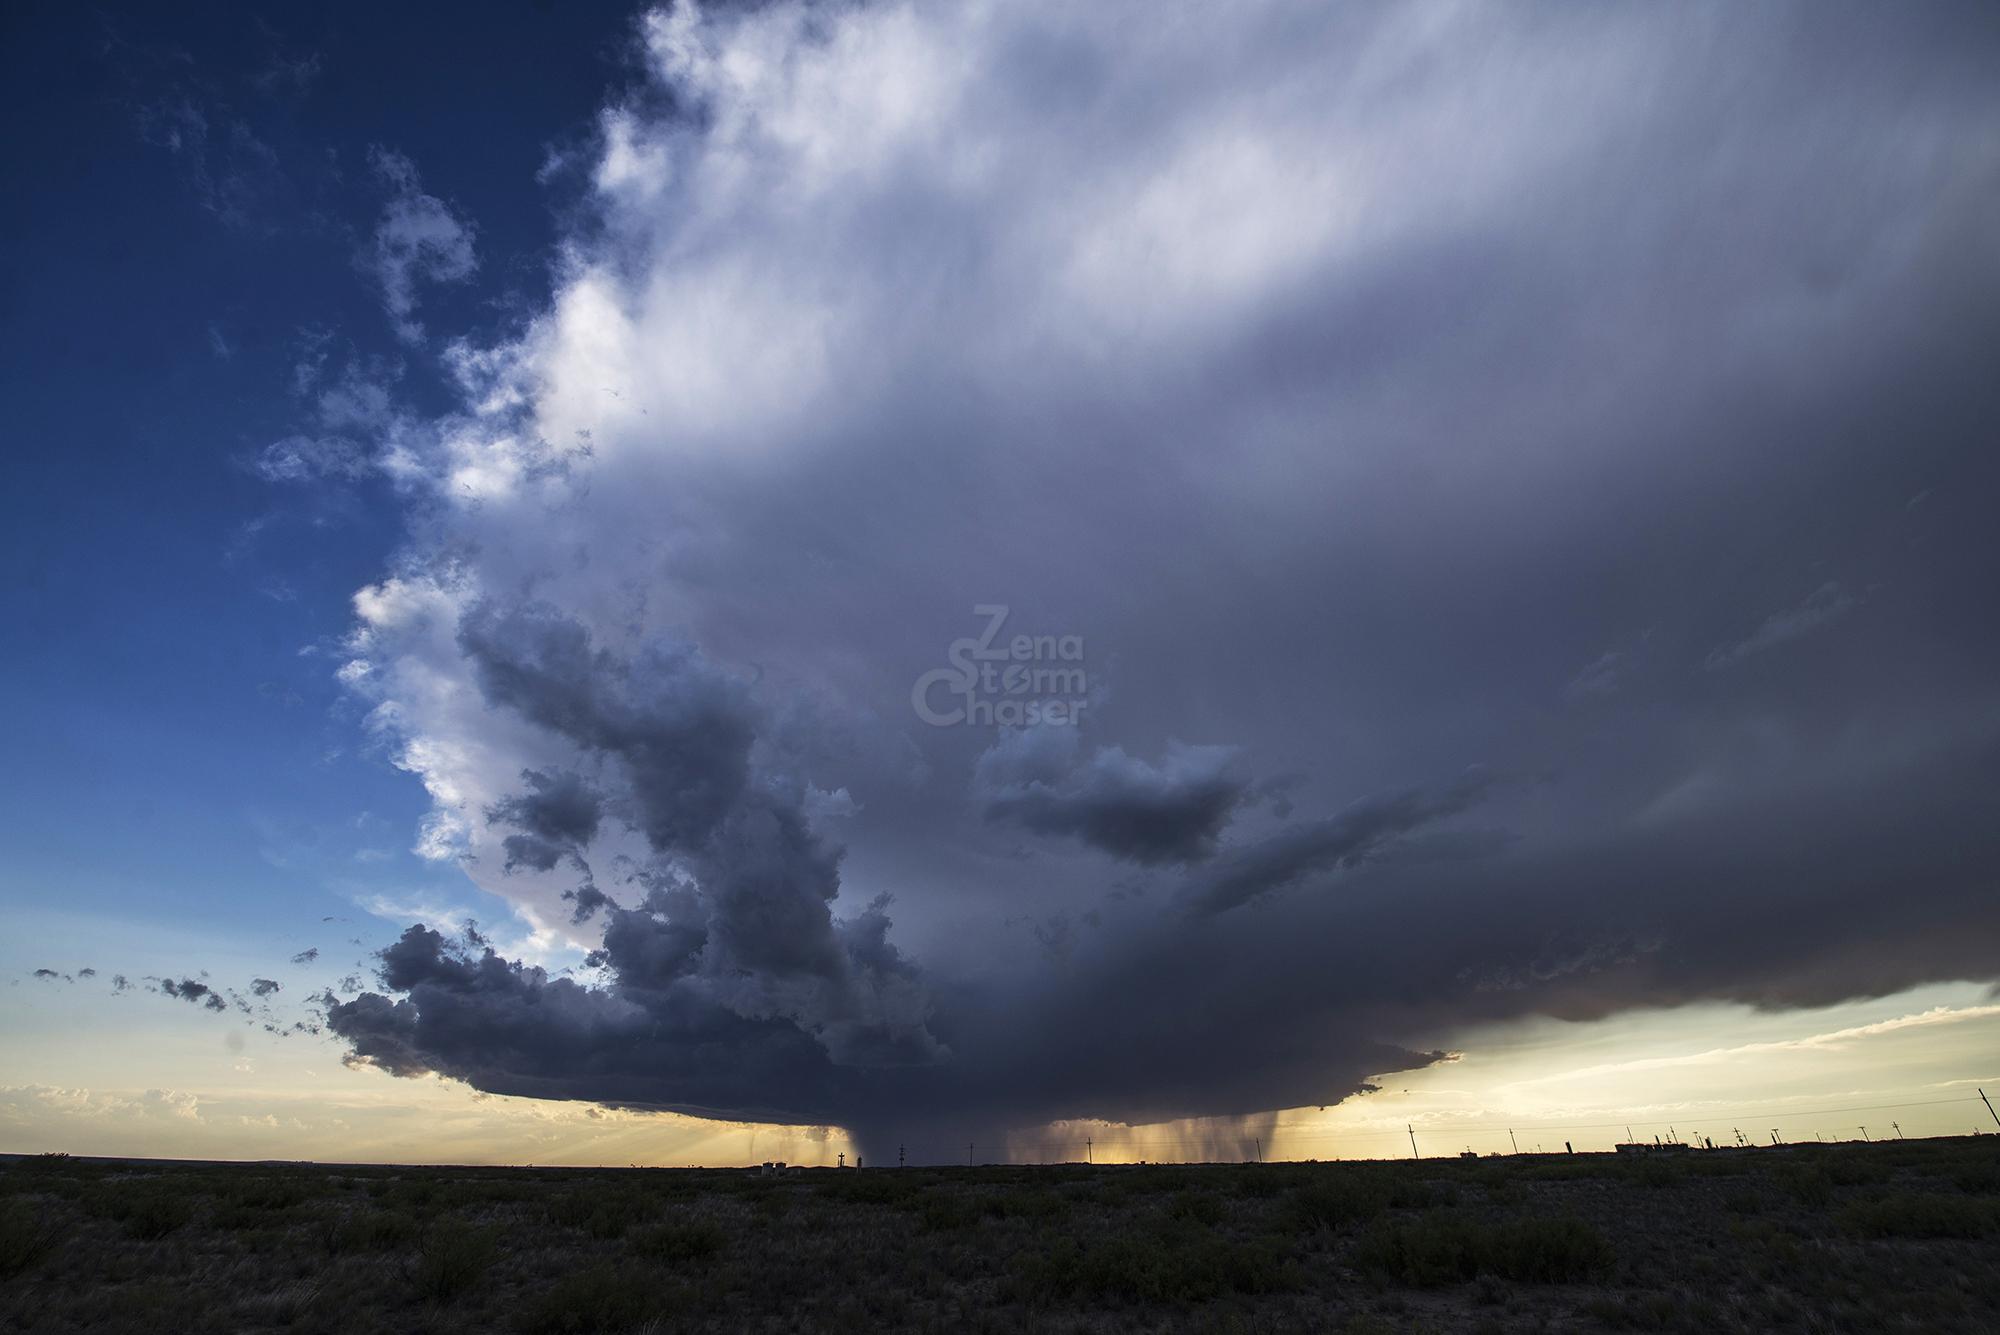 Obbs supercells New Messico – 25 may 2014